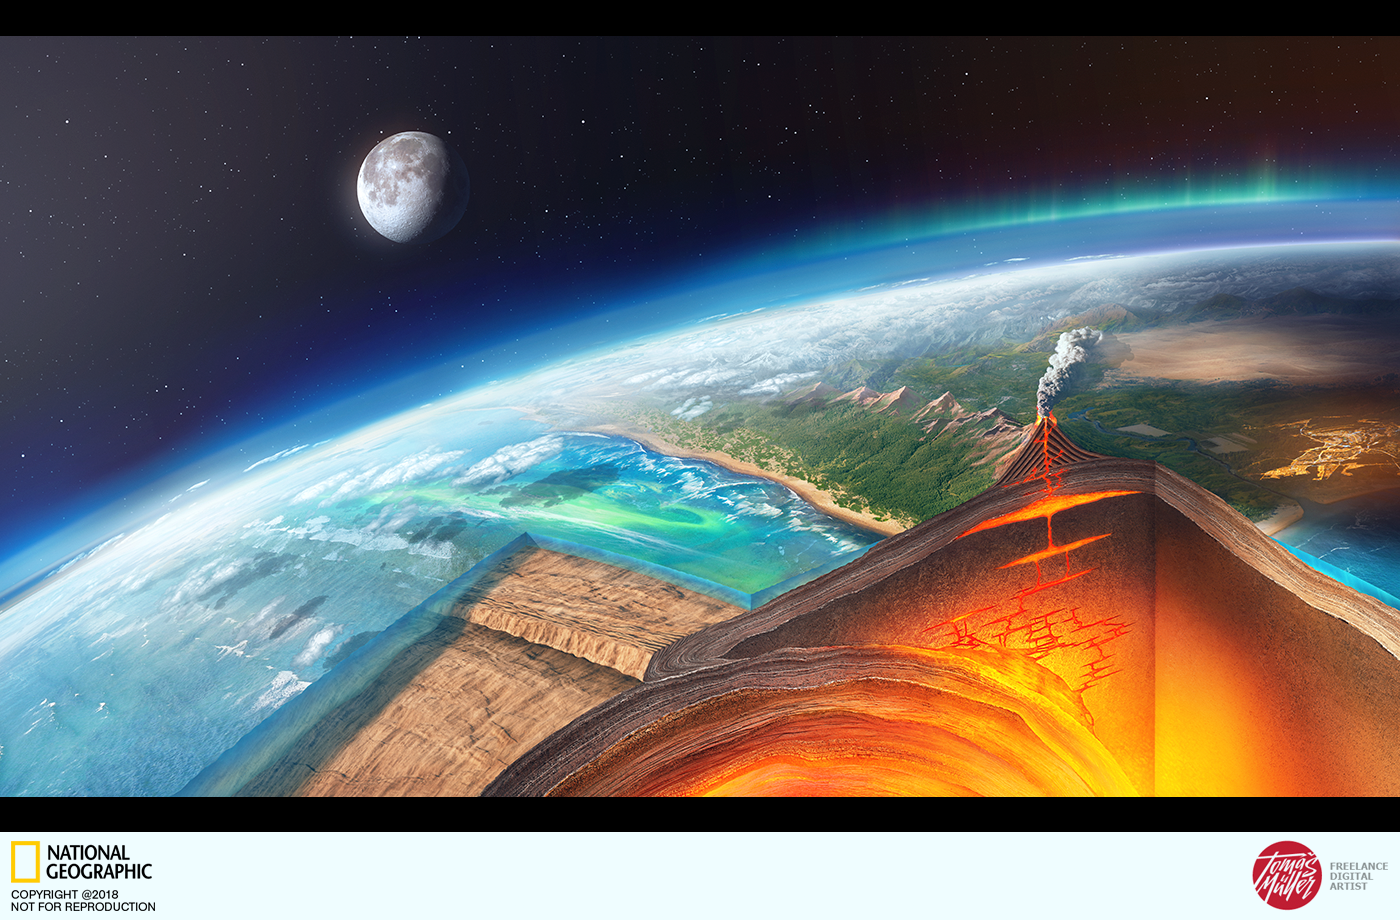 NATGEO nationalgeographic infographic earth magazine ILLUSTRATION  editorial poster ng science